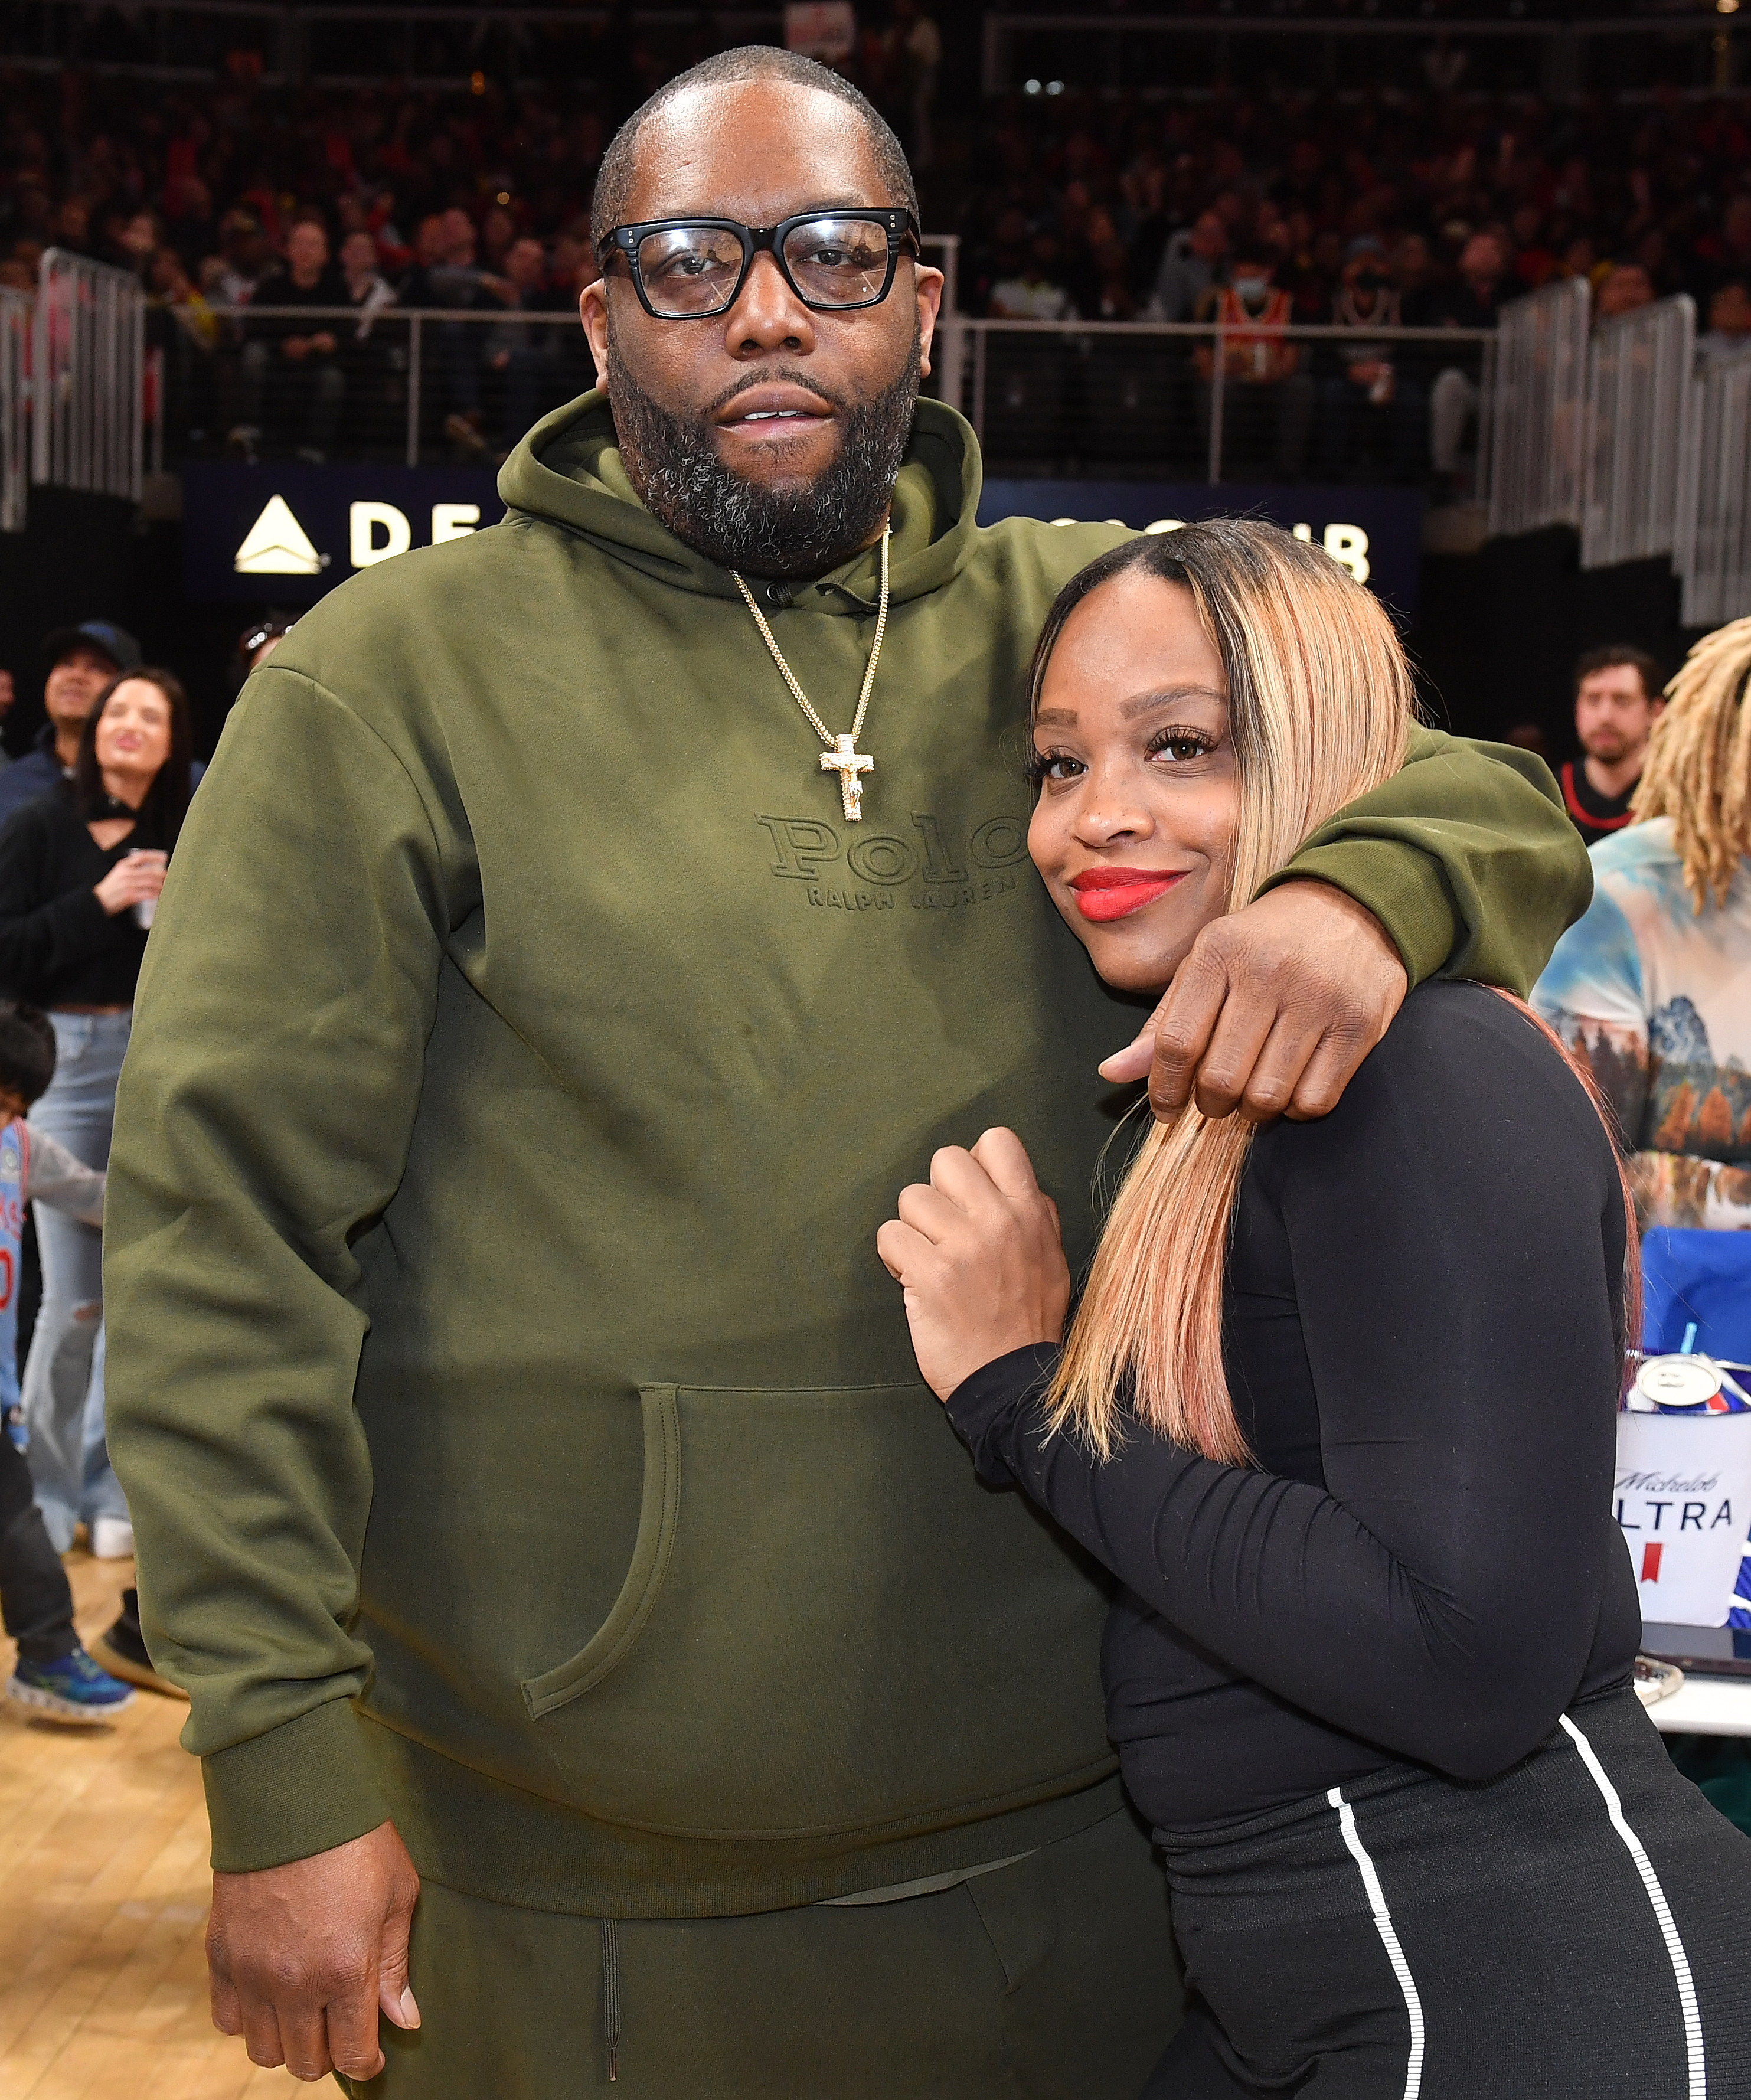 Killer Mike and Shana Render at the game between the Miami Heat and the Atlanta Hawks at State Farm Arena on January 16, 2023 in Atlanta, Georgia. | Source: Getty Images